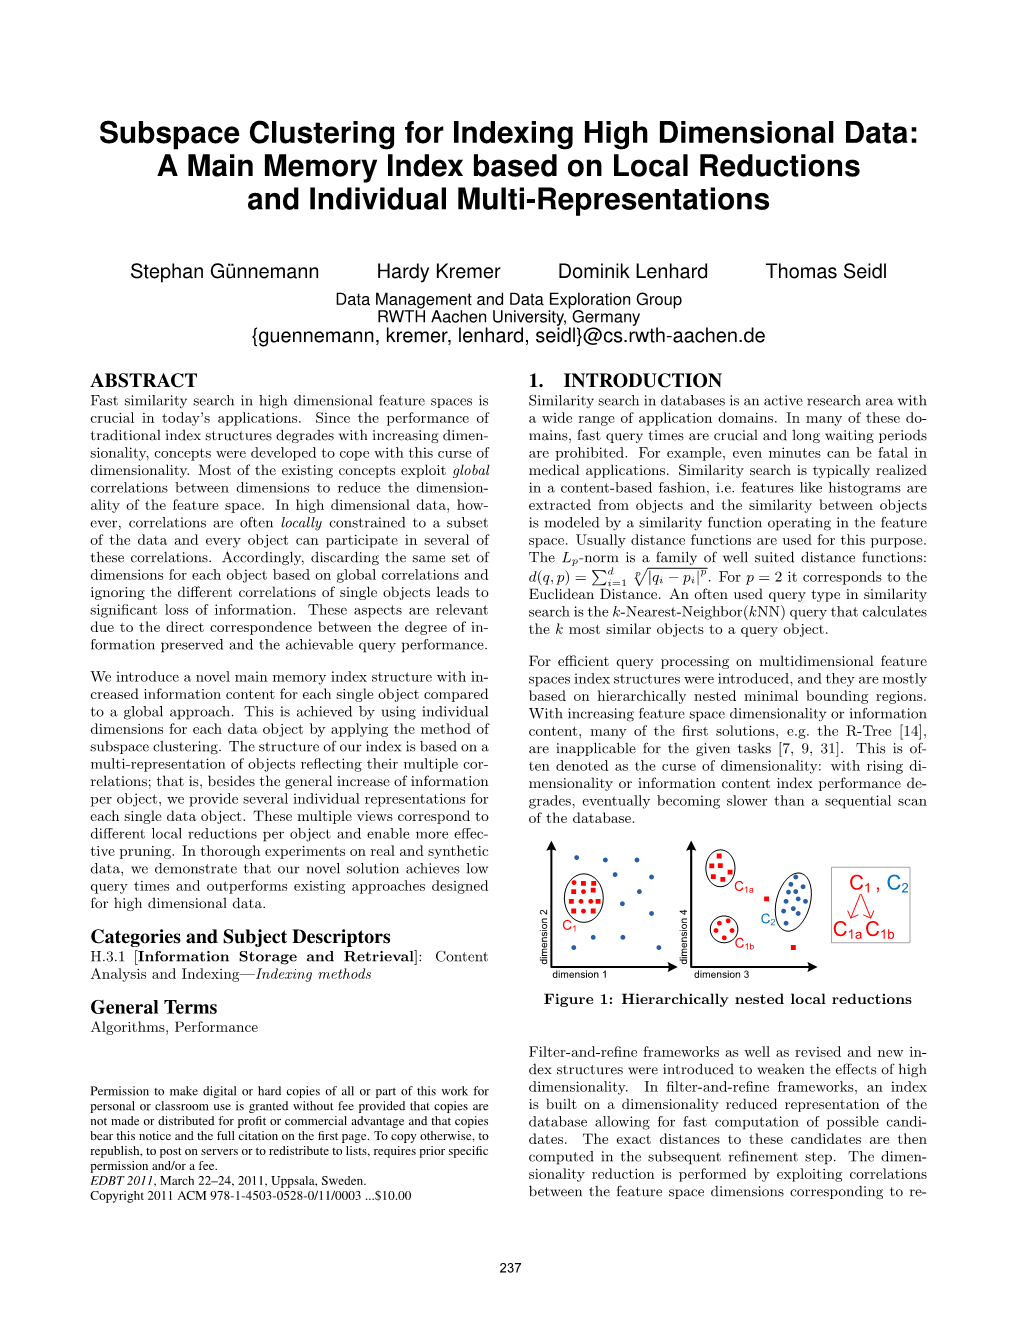 Subspace Clustering for Indexing High Dimensional Data: a Main Memory Index Based on Local Reductions and Individual Multi-Representations